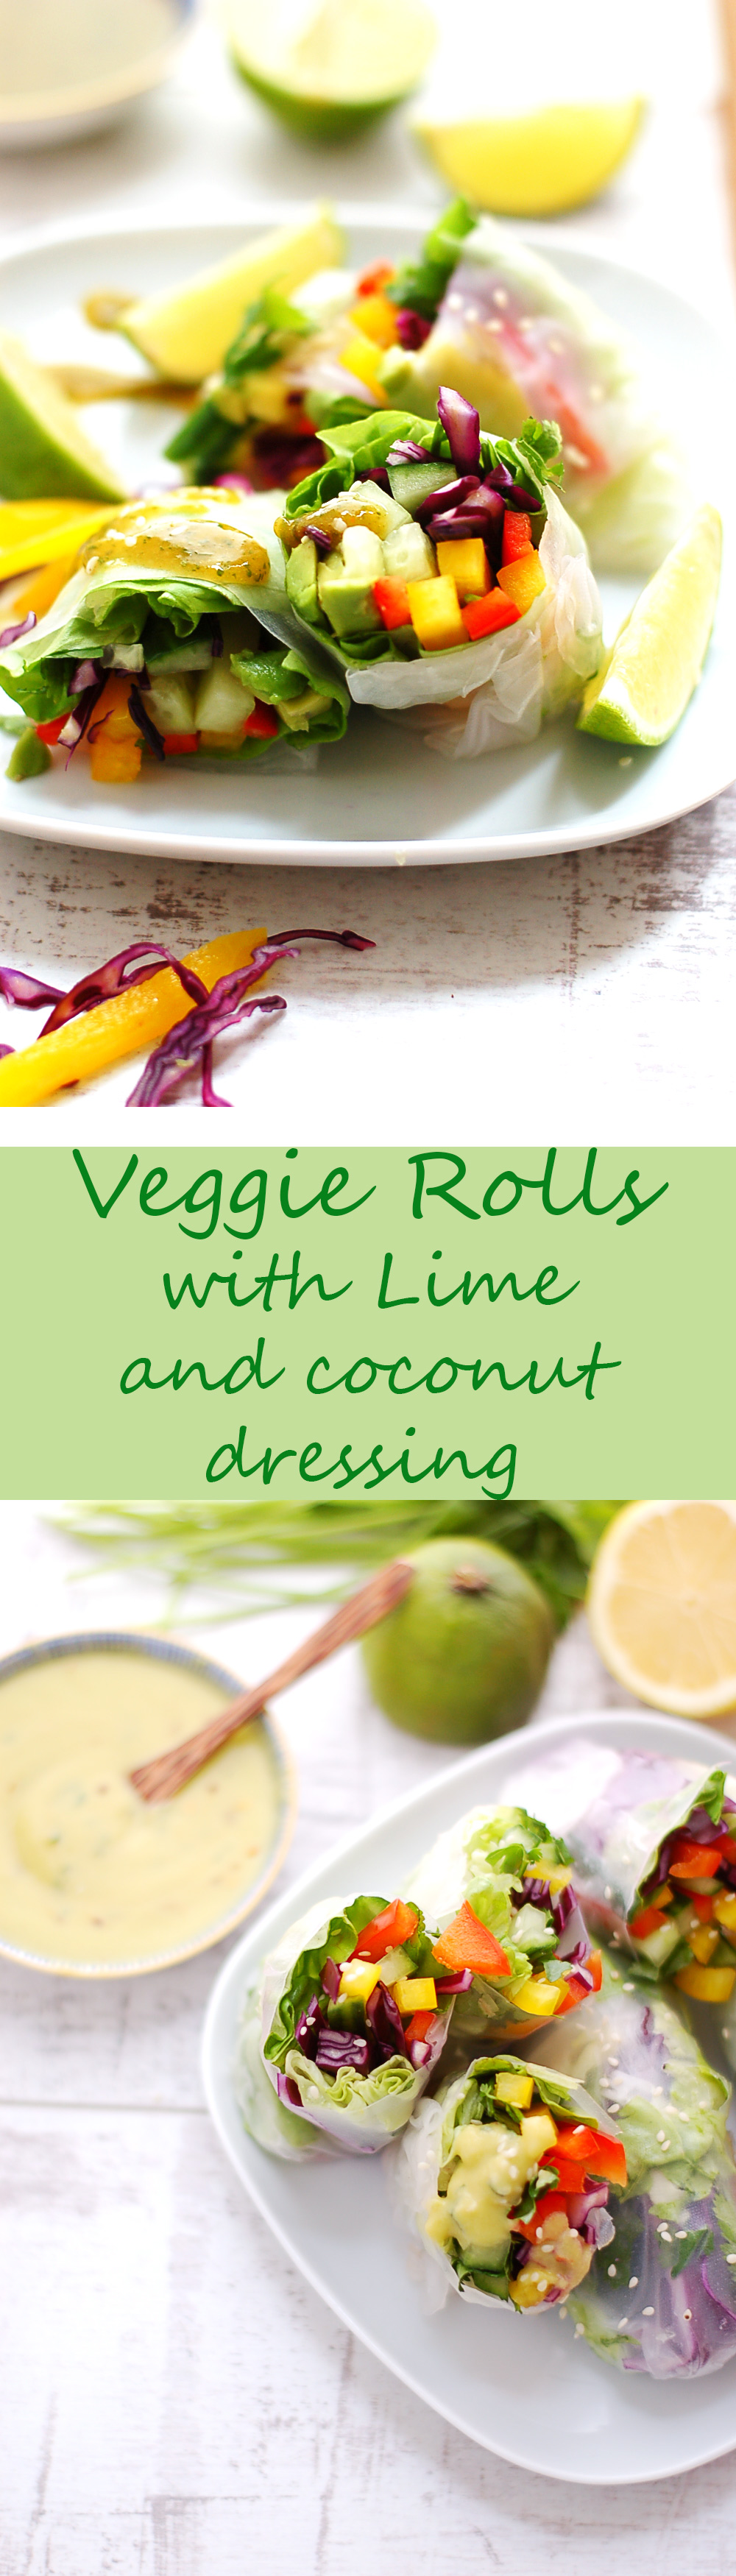 Yummy and Healthy Veggie Rolls with lime and coconu